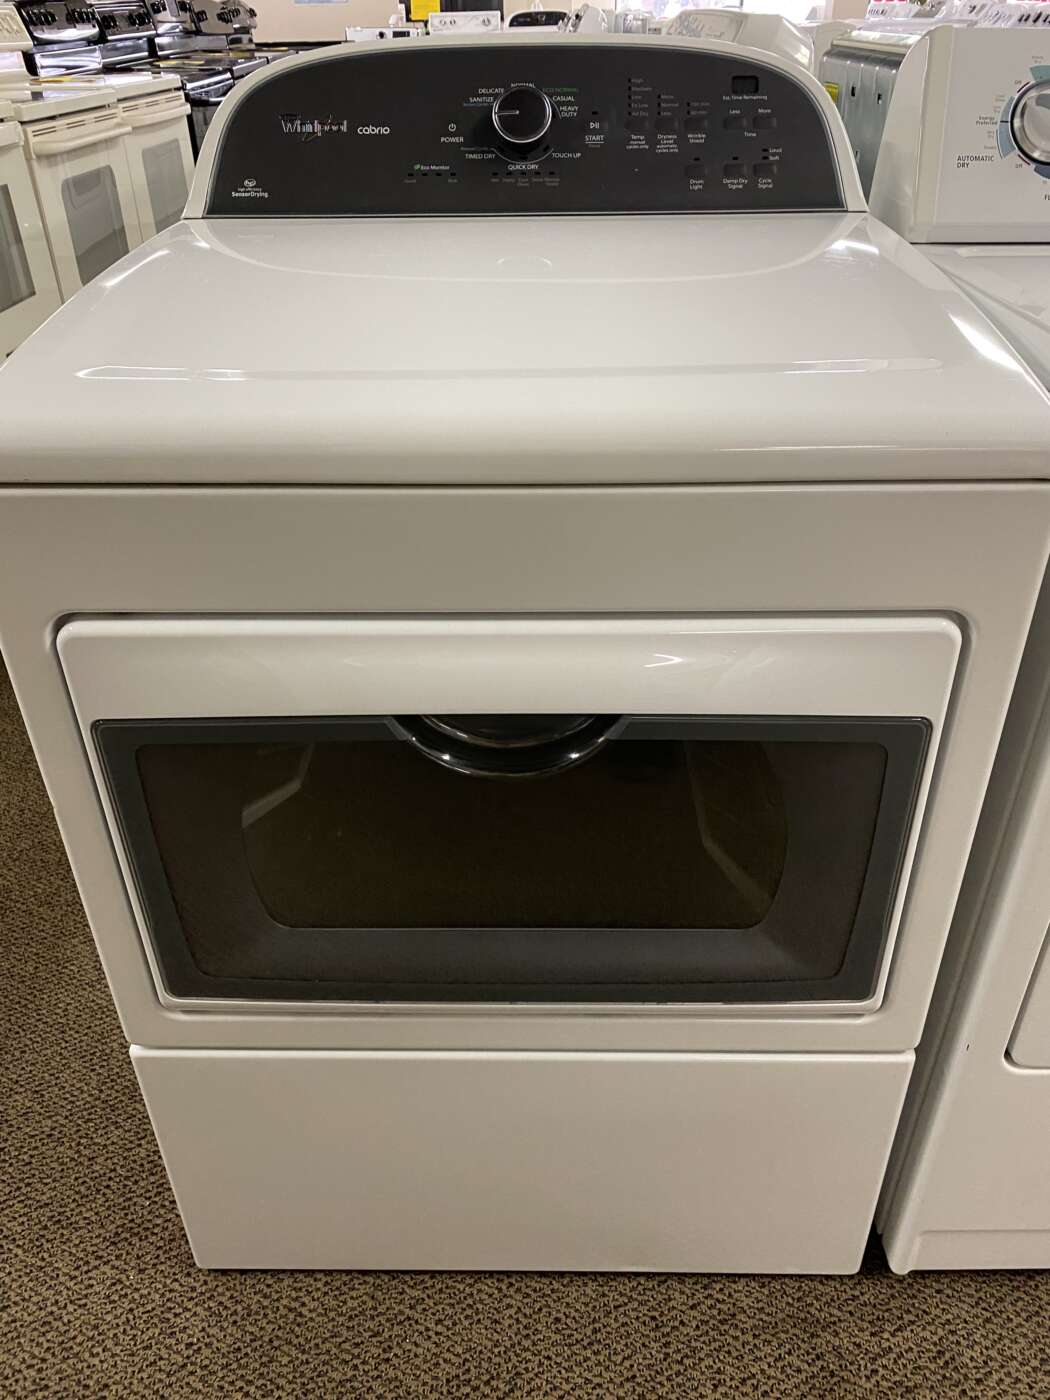 Reconditioned WHIRLPOOL 7.4 Cu. Ft. Electric Dryer – White